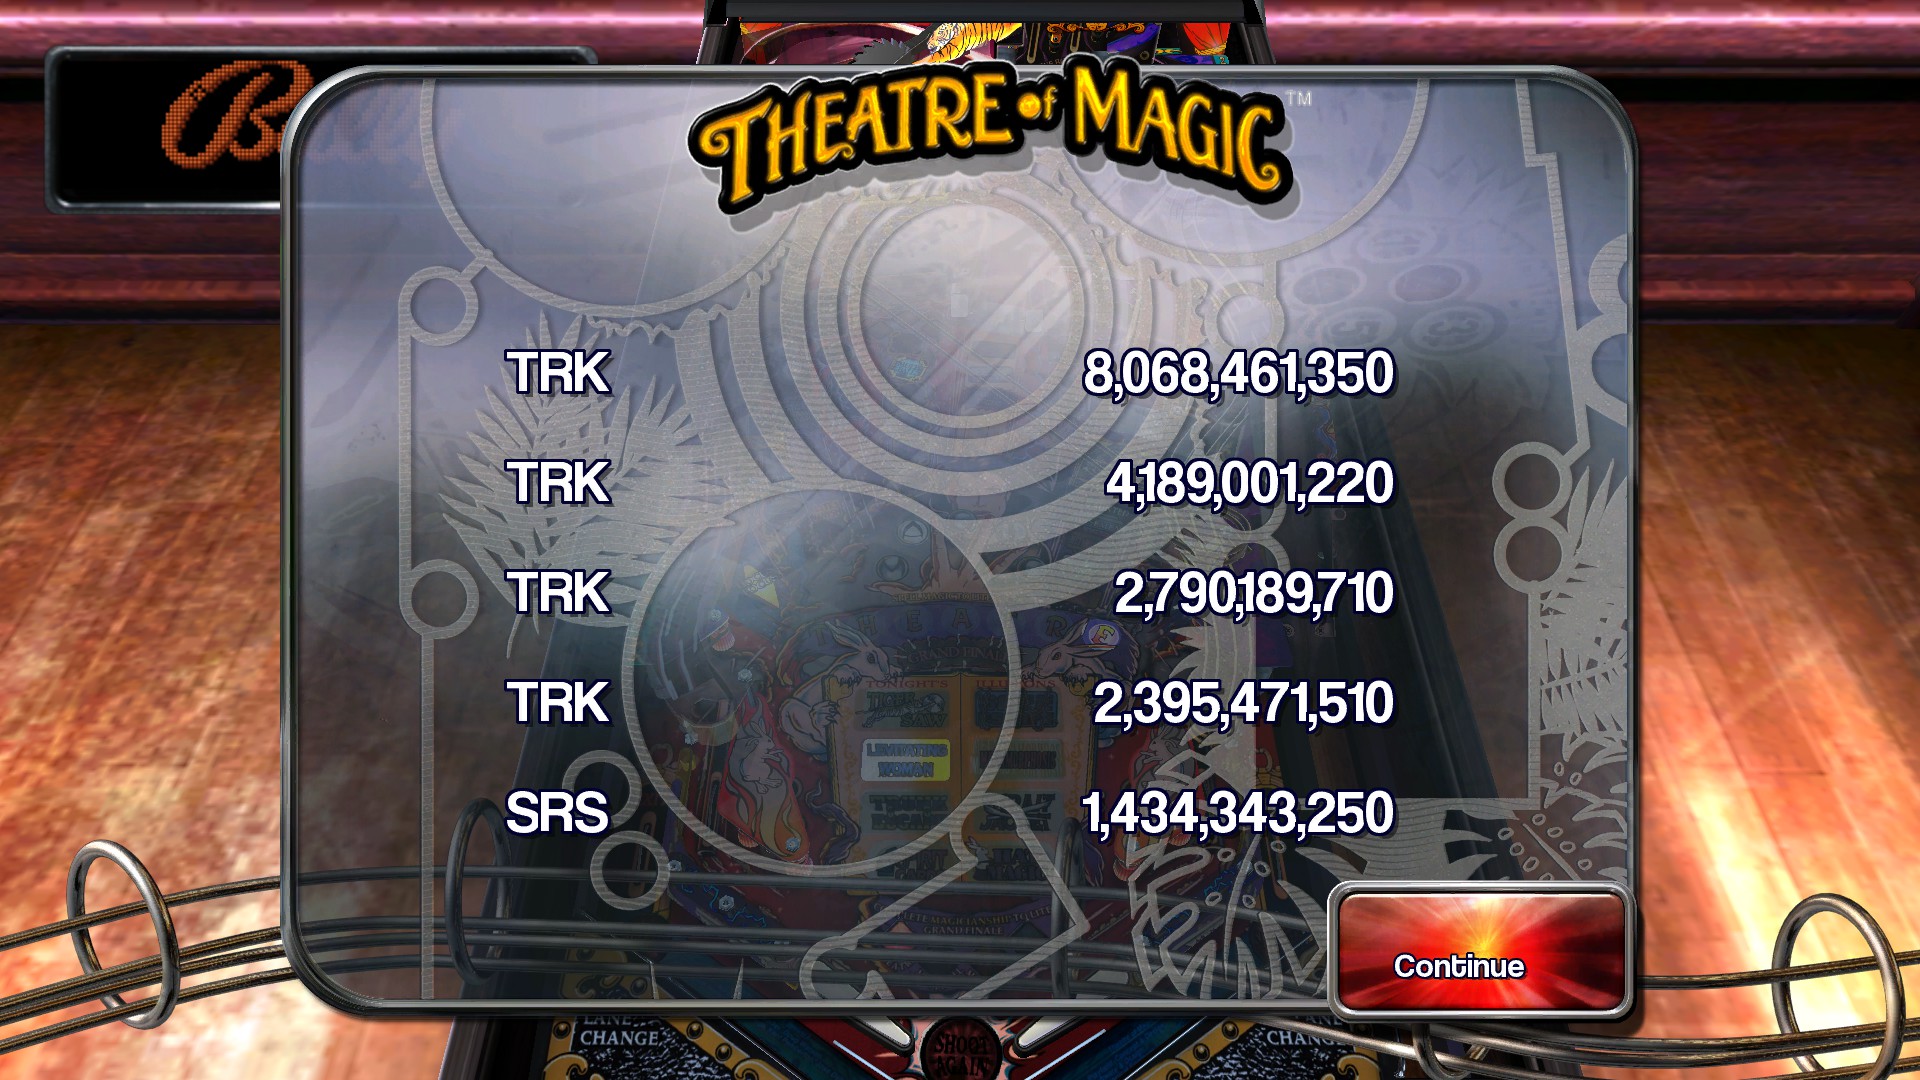 TheTrickster: Pinball Arcade: Theatre of Magic (PC) 8,068,461,350 points on 2015-11-21 23:12:35